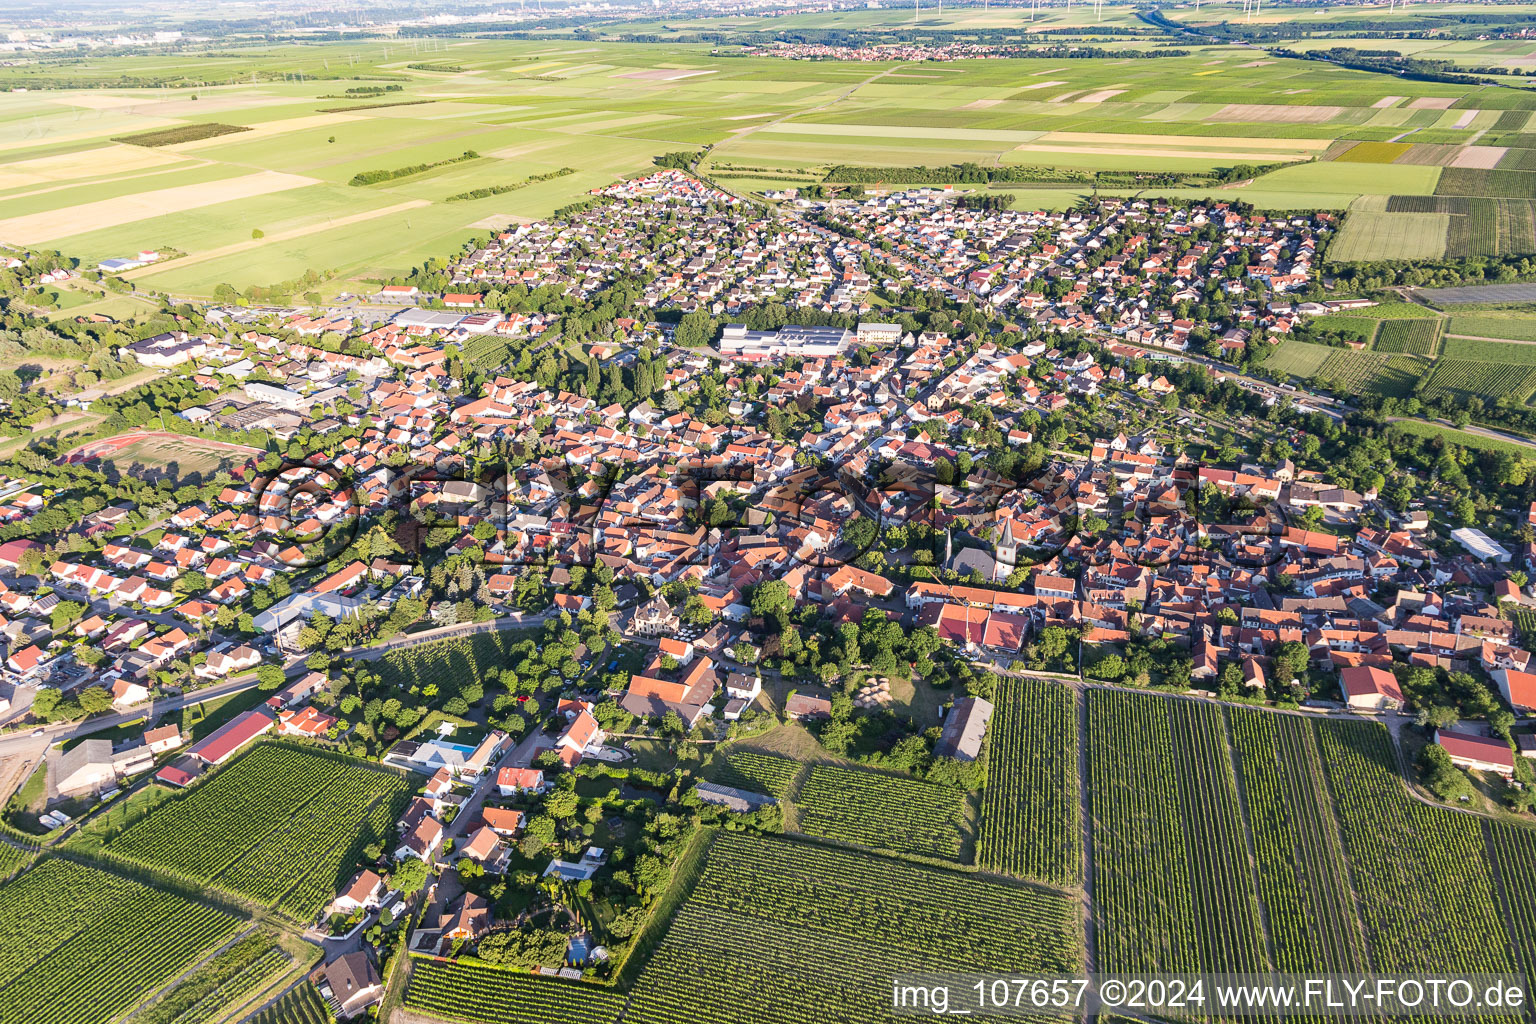 Agricultural land and field borders surround the settlement area of the village in Westhofen in the state Rhineland-Palatinate, Germany viewn from the air